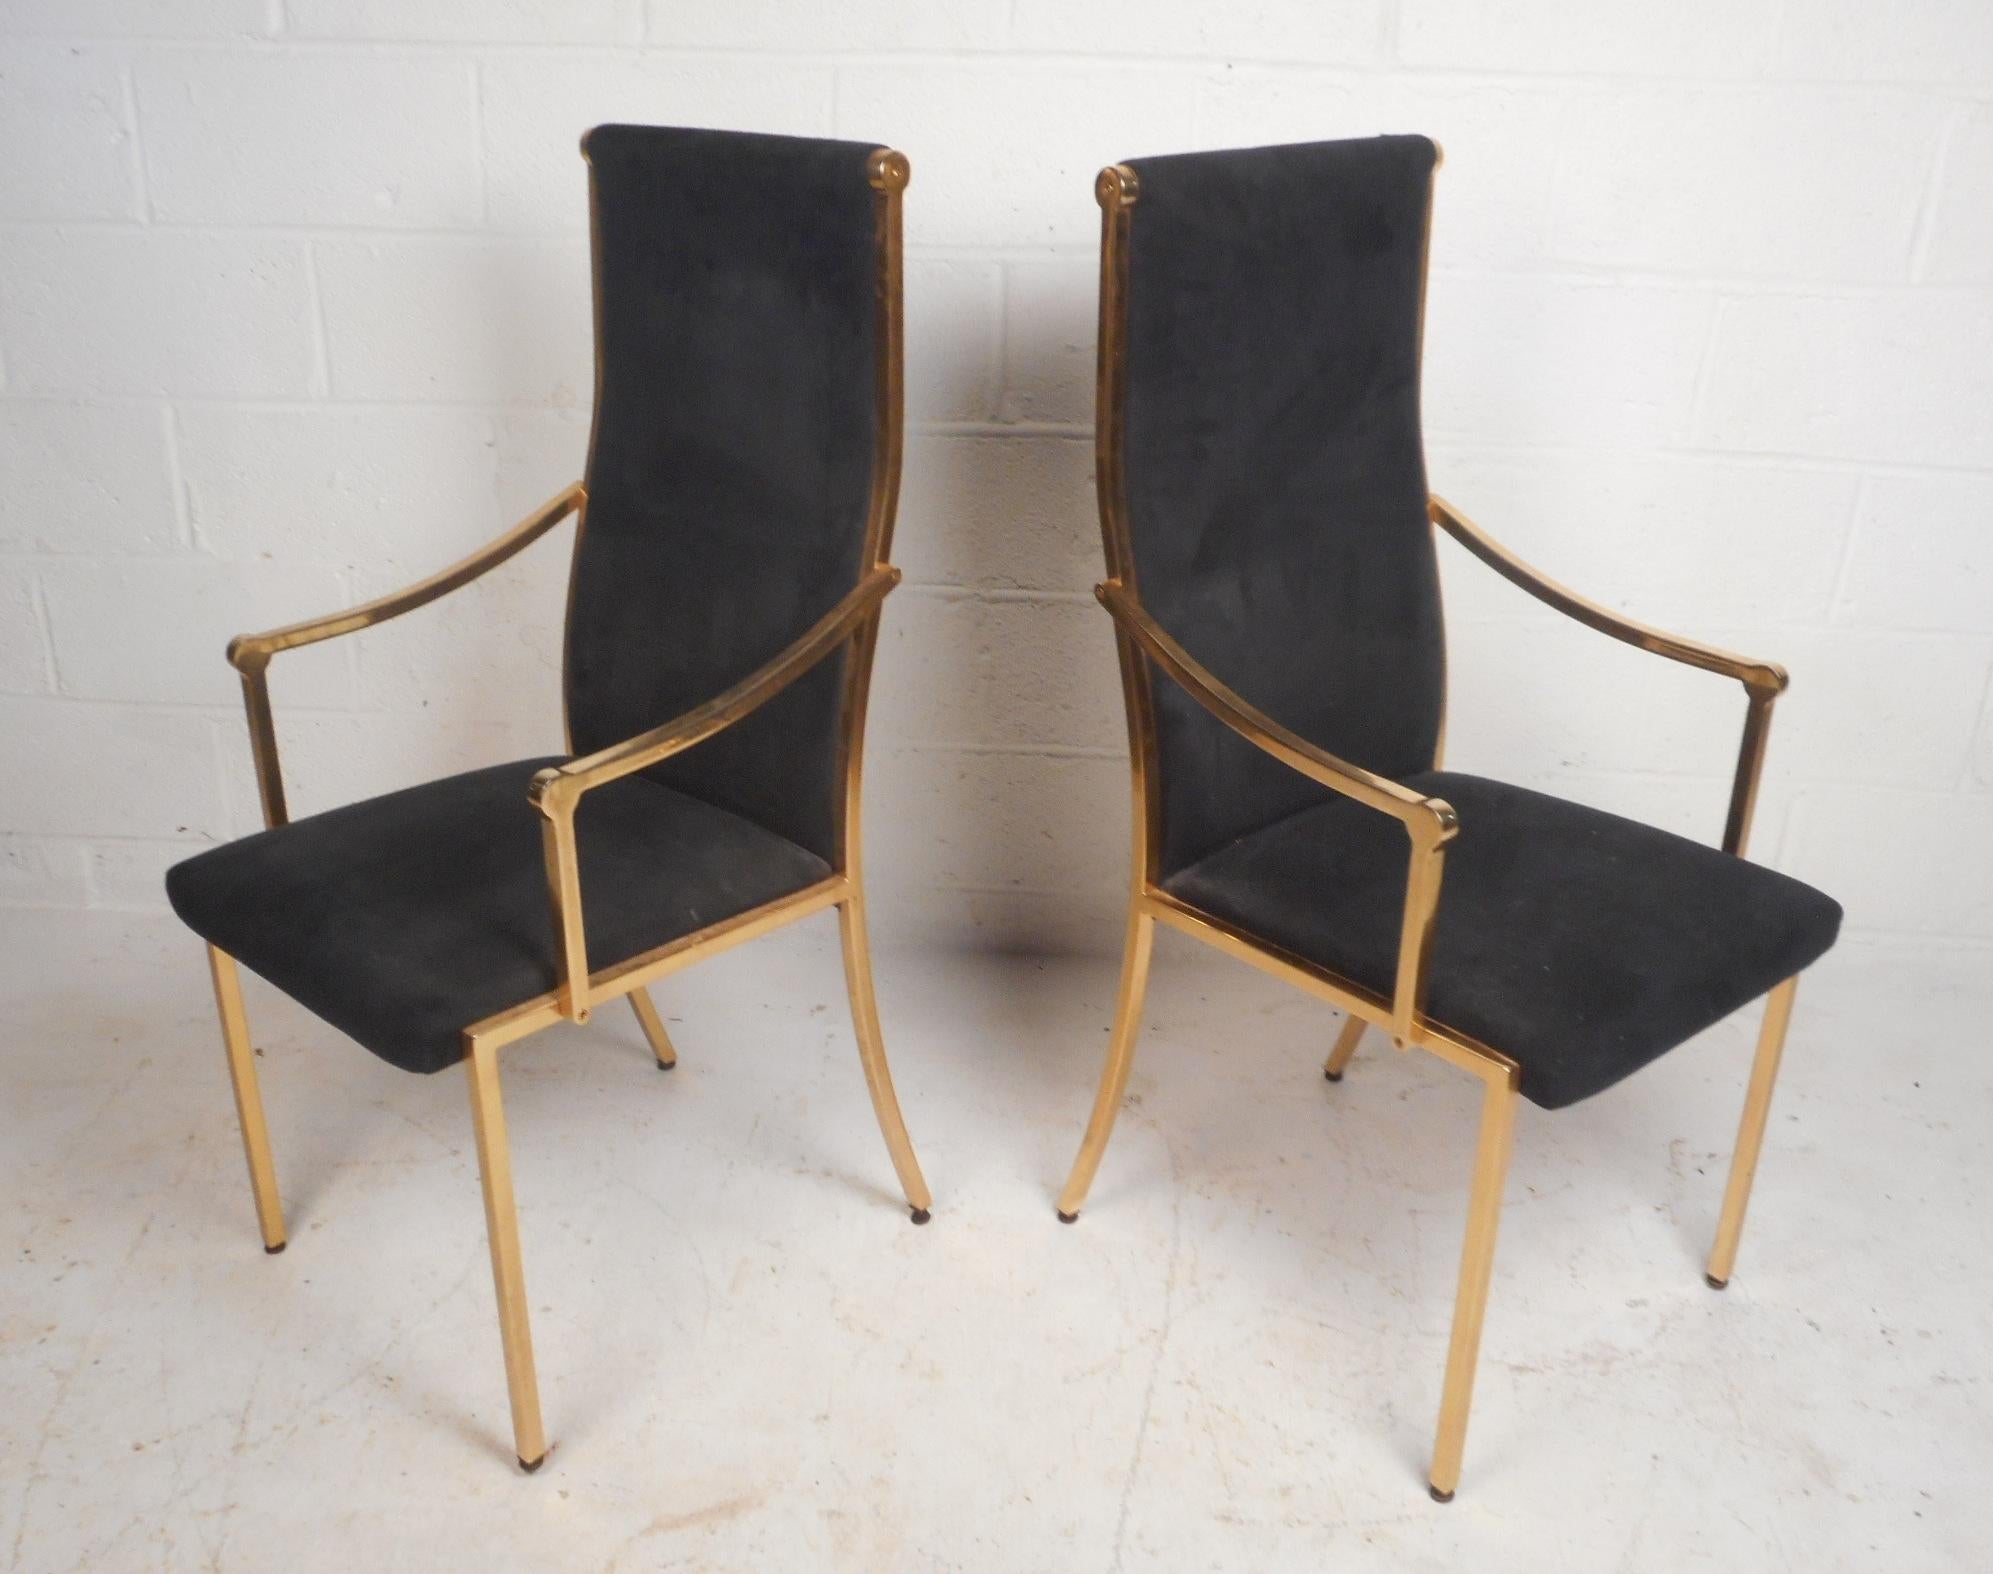 This beautiful set of six vintage modern dining chairs include two arm chairs and four dining chairs. Sleek design with a heavy brass frame and navy blue velvet upholstery. A unique angled high back rest, thick padded seats, and angled back legs